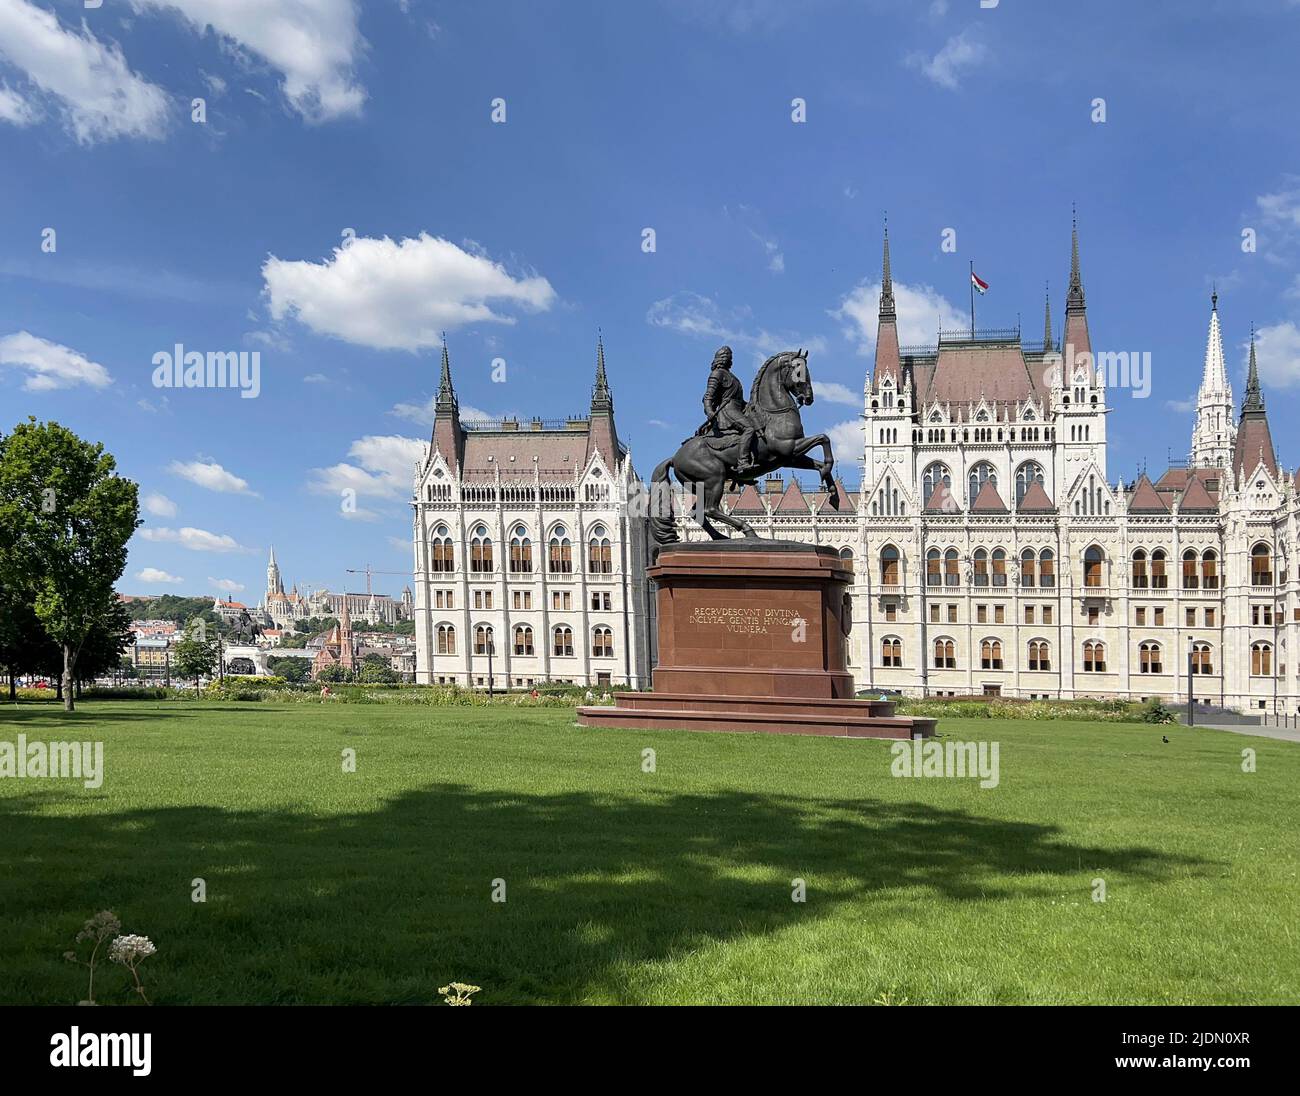 Statue of Francis II Rákóczi in front of the Hungarian Parliament Building in Budapest, Hungary Stock Photo